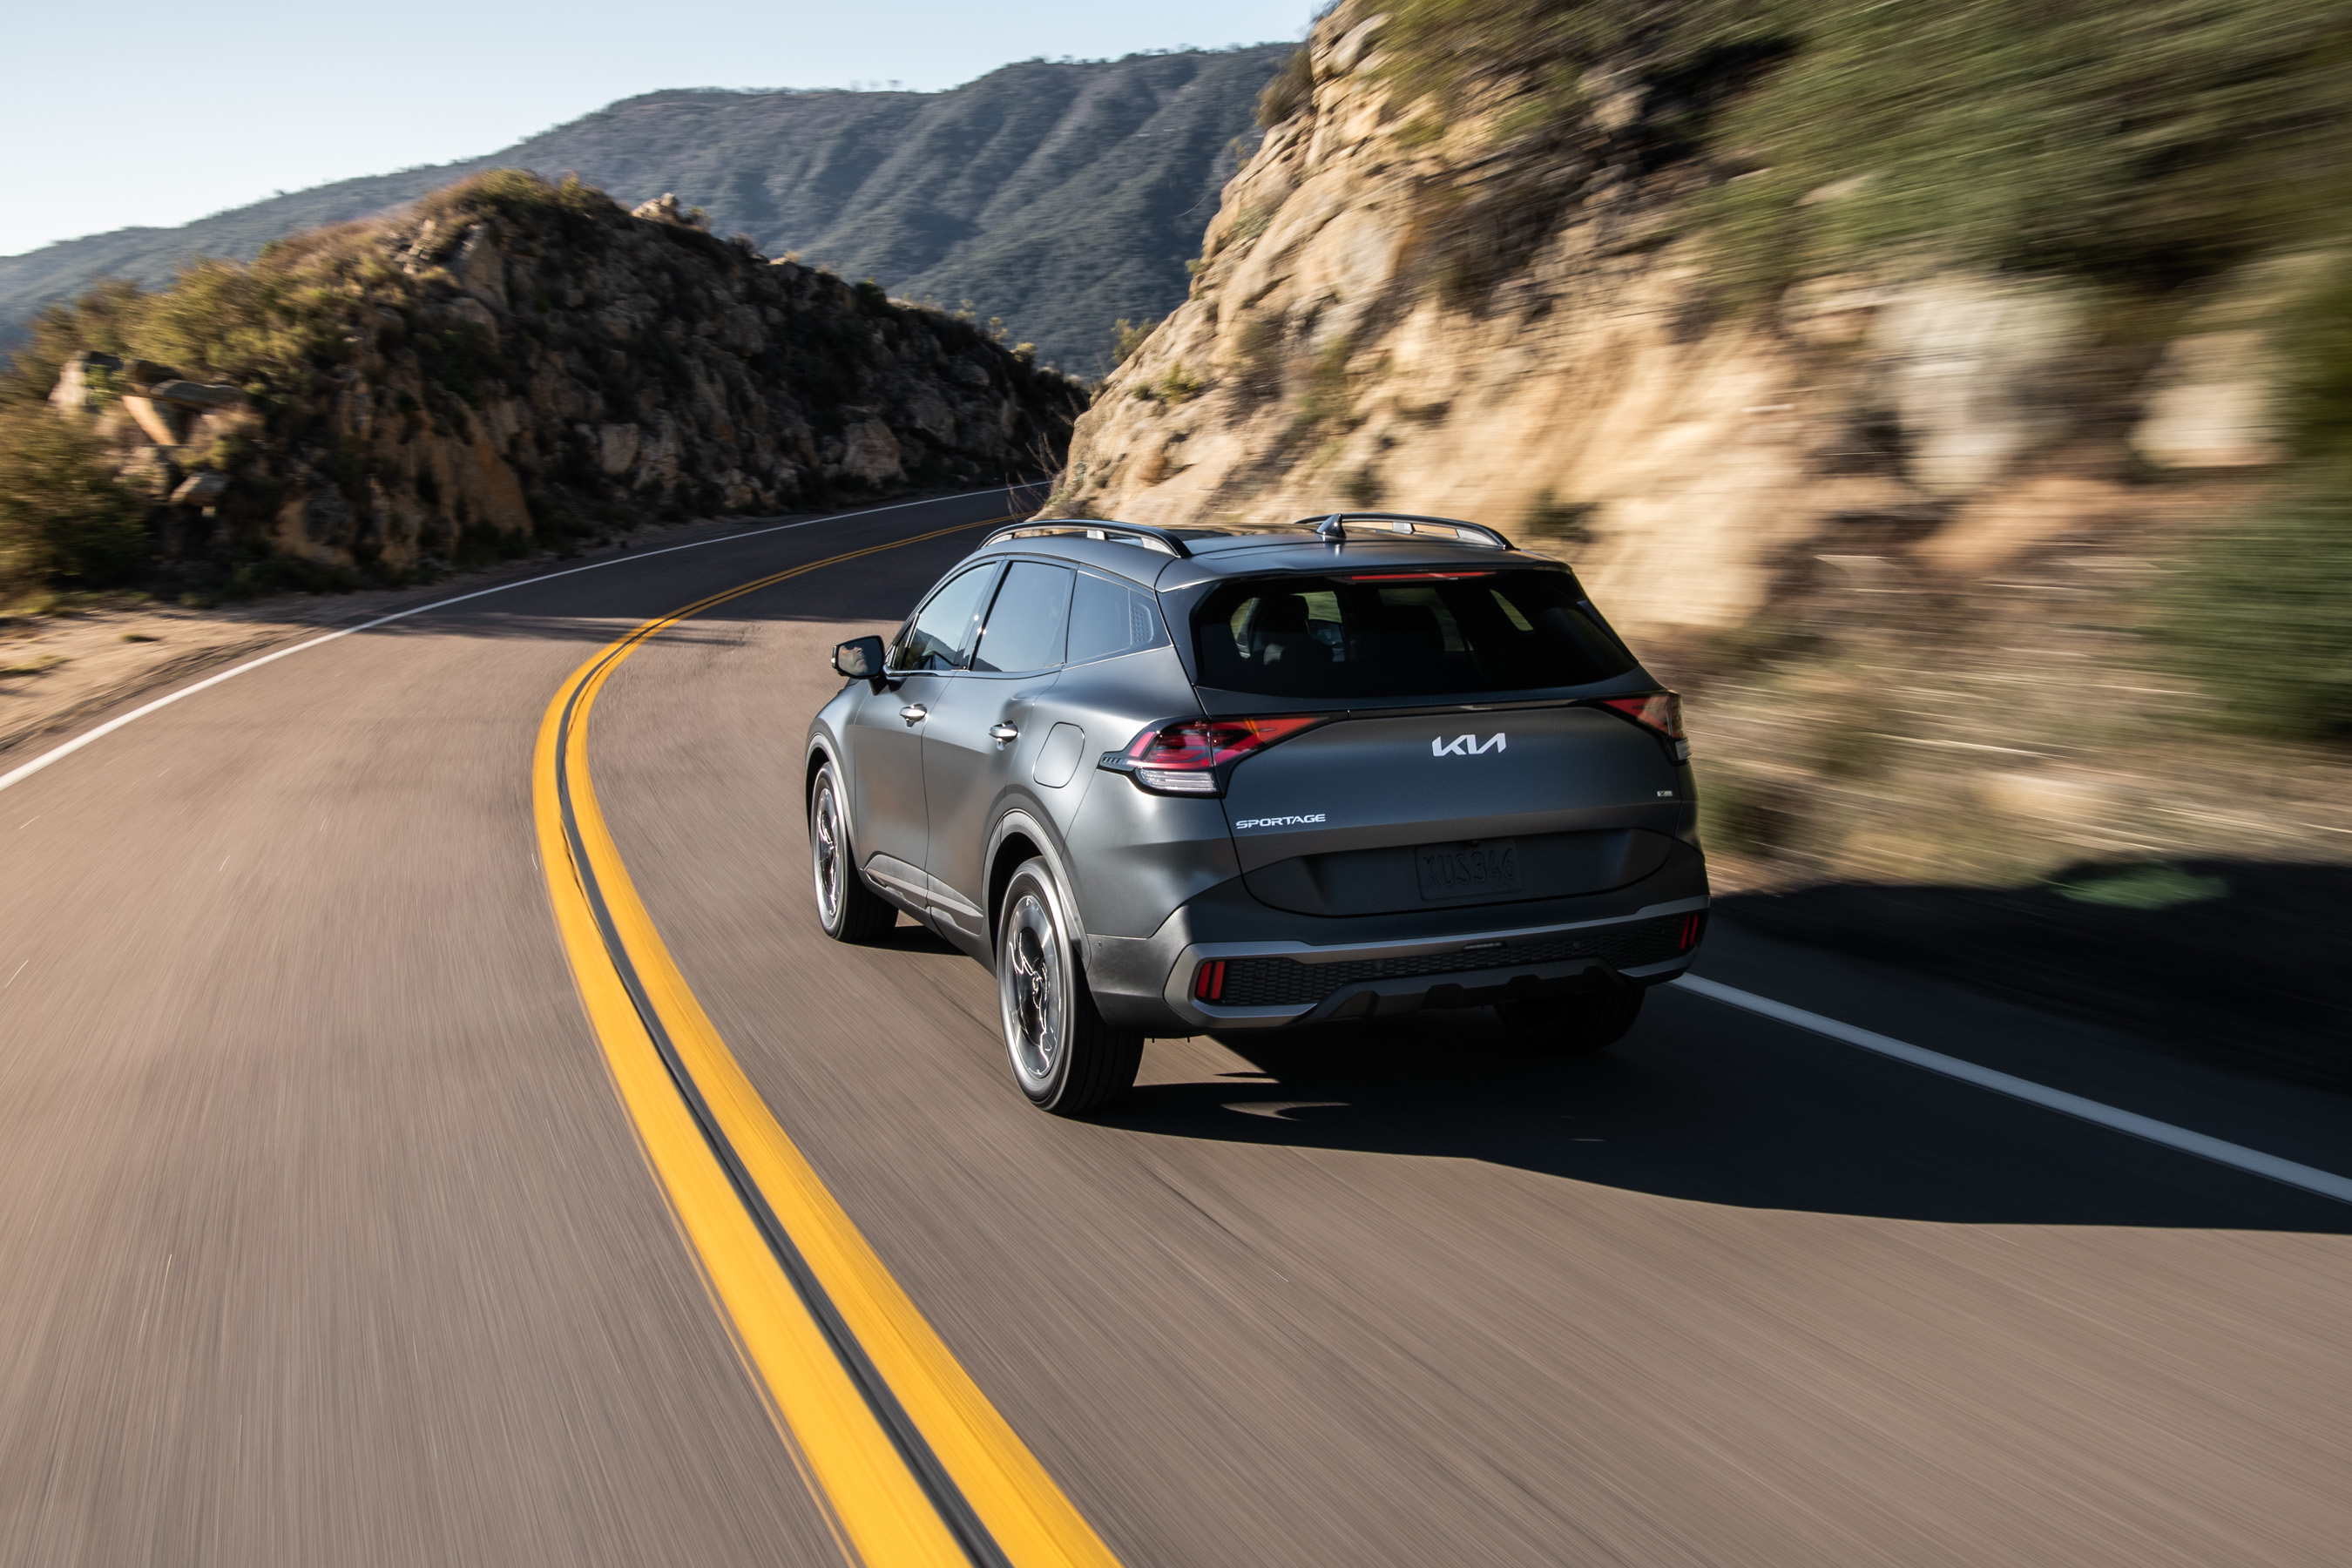 The all-new 2023 Sportage PHEV paves the way for Kia’s push toward carbon neutrality as part of the brand’s Plan S strategy.